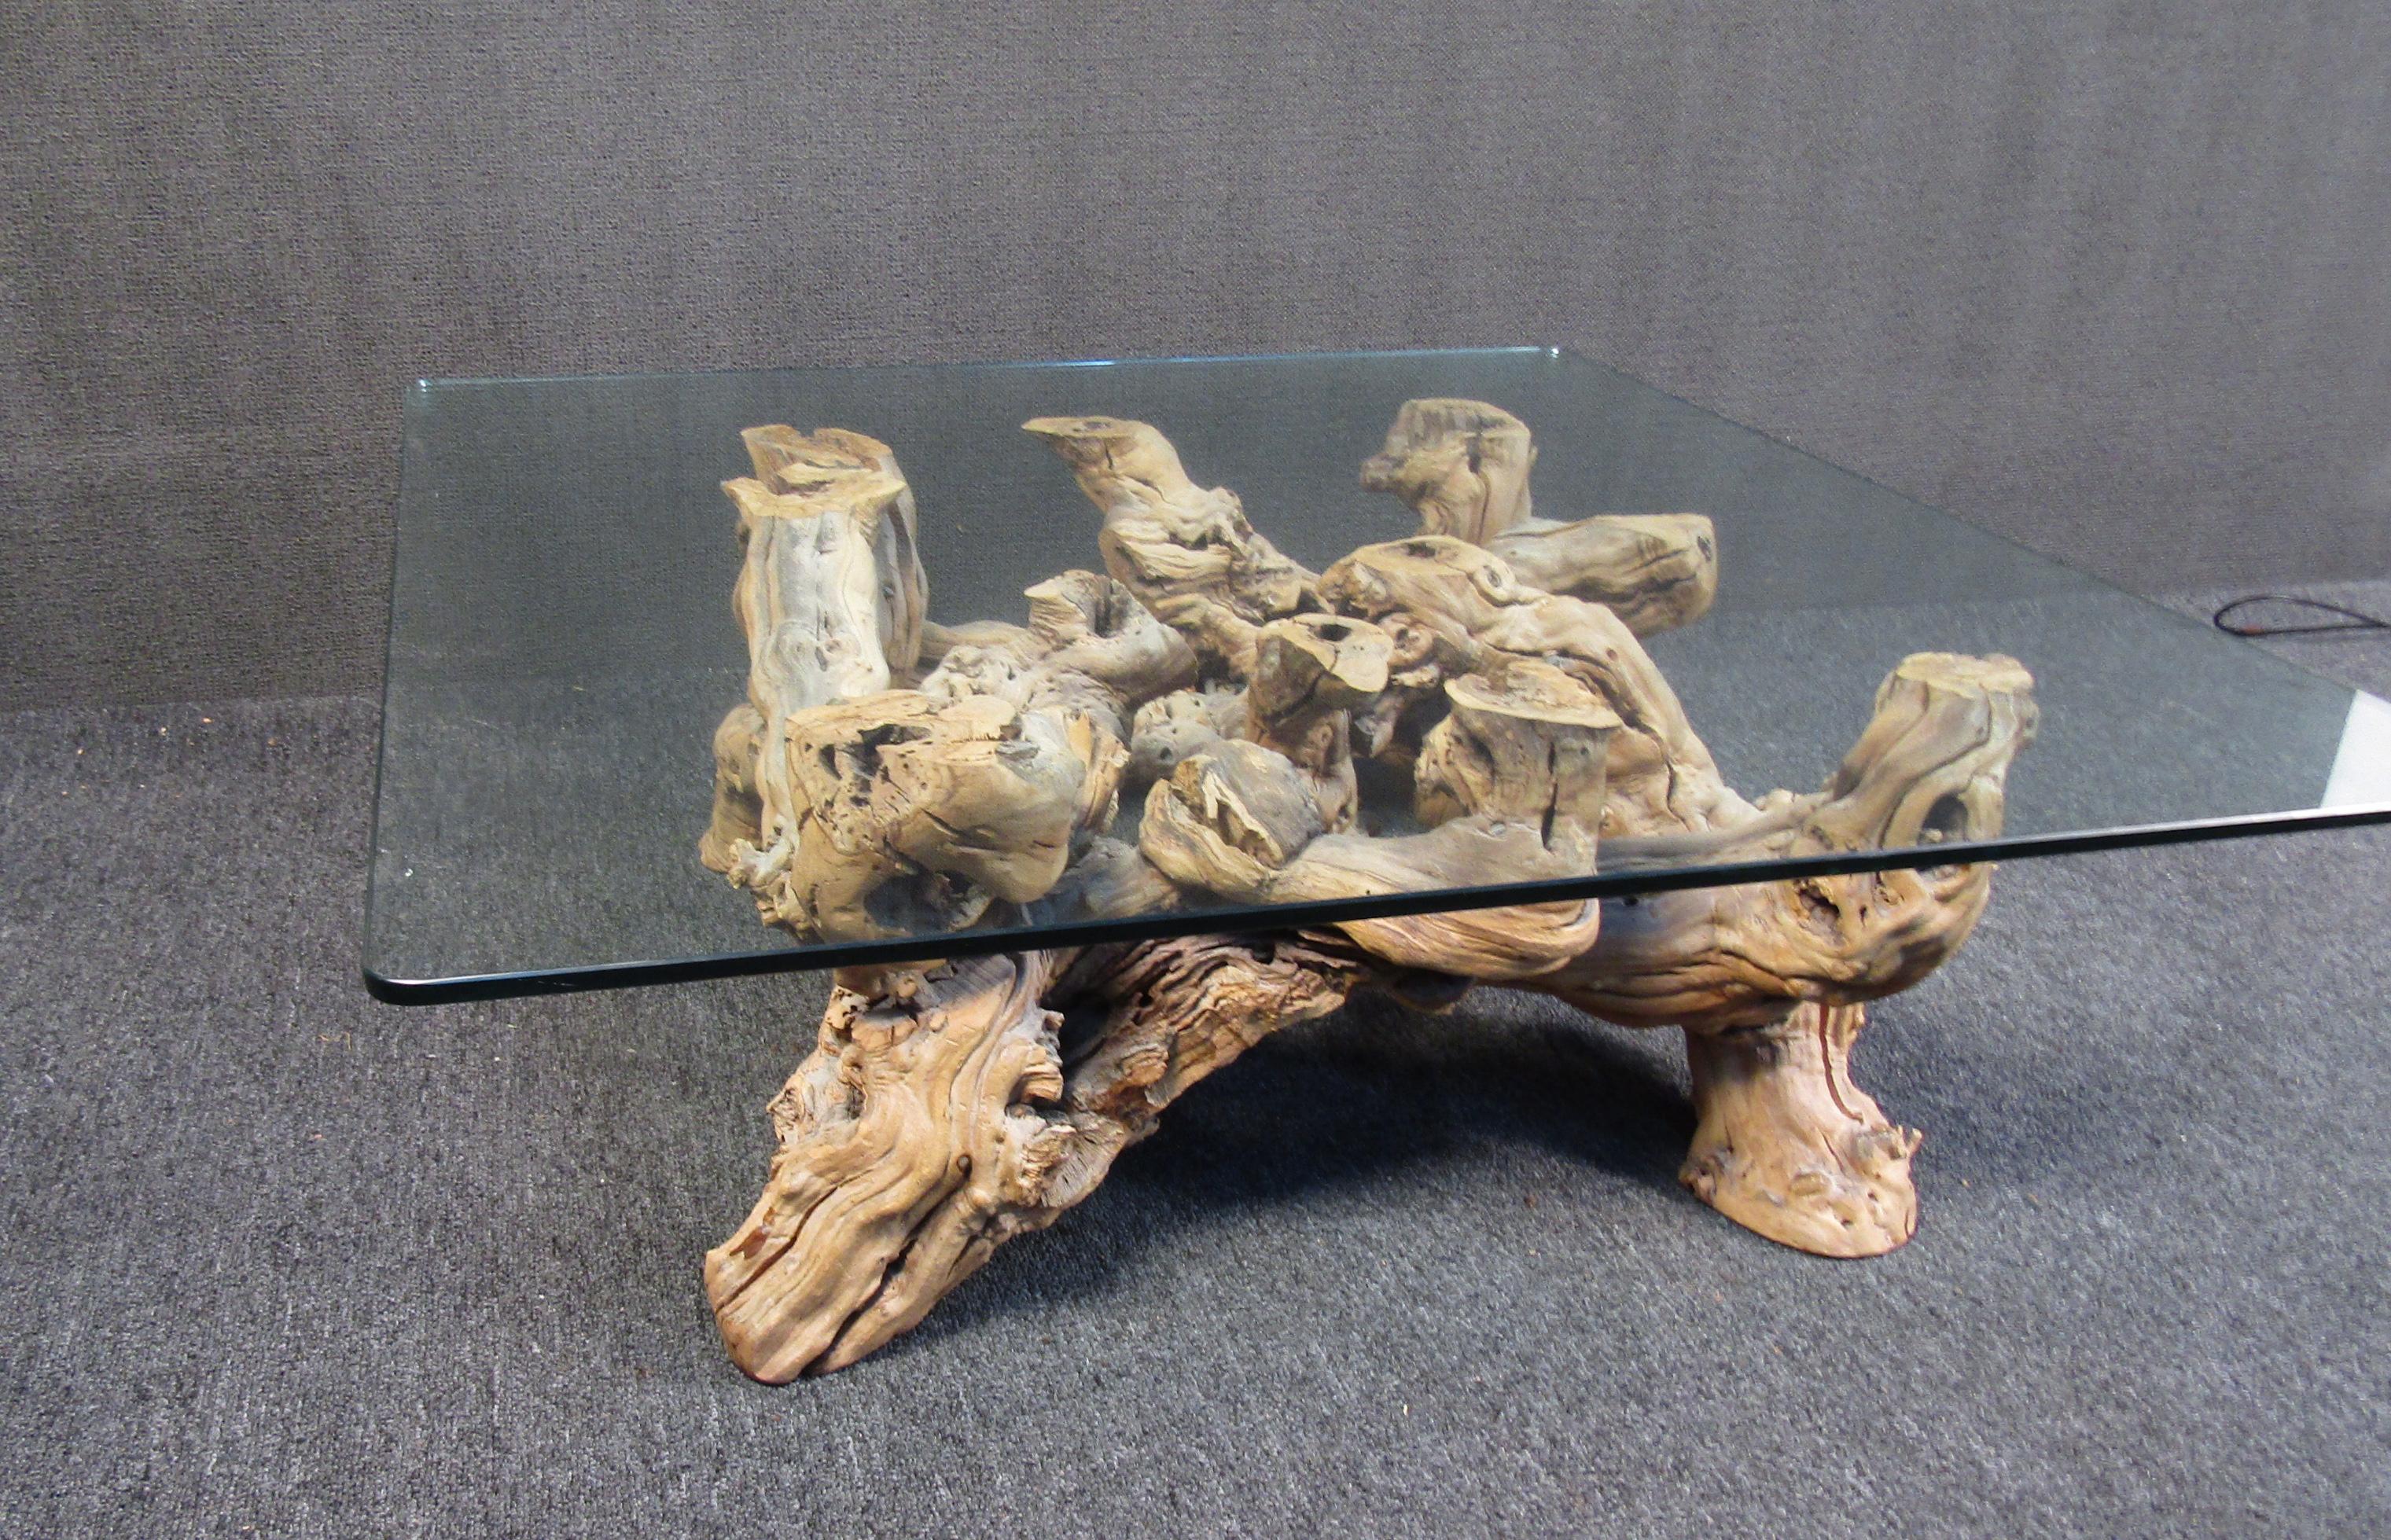 This one of a kind coffee table features a base of intertwined driftwood and a glass top for a unique look. The well-preserved wooden base brings a small piece of nature into any home or space. Please confirm the item location (NY or NJ).